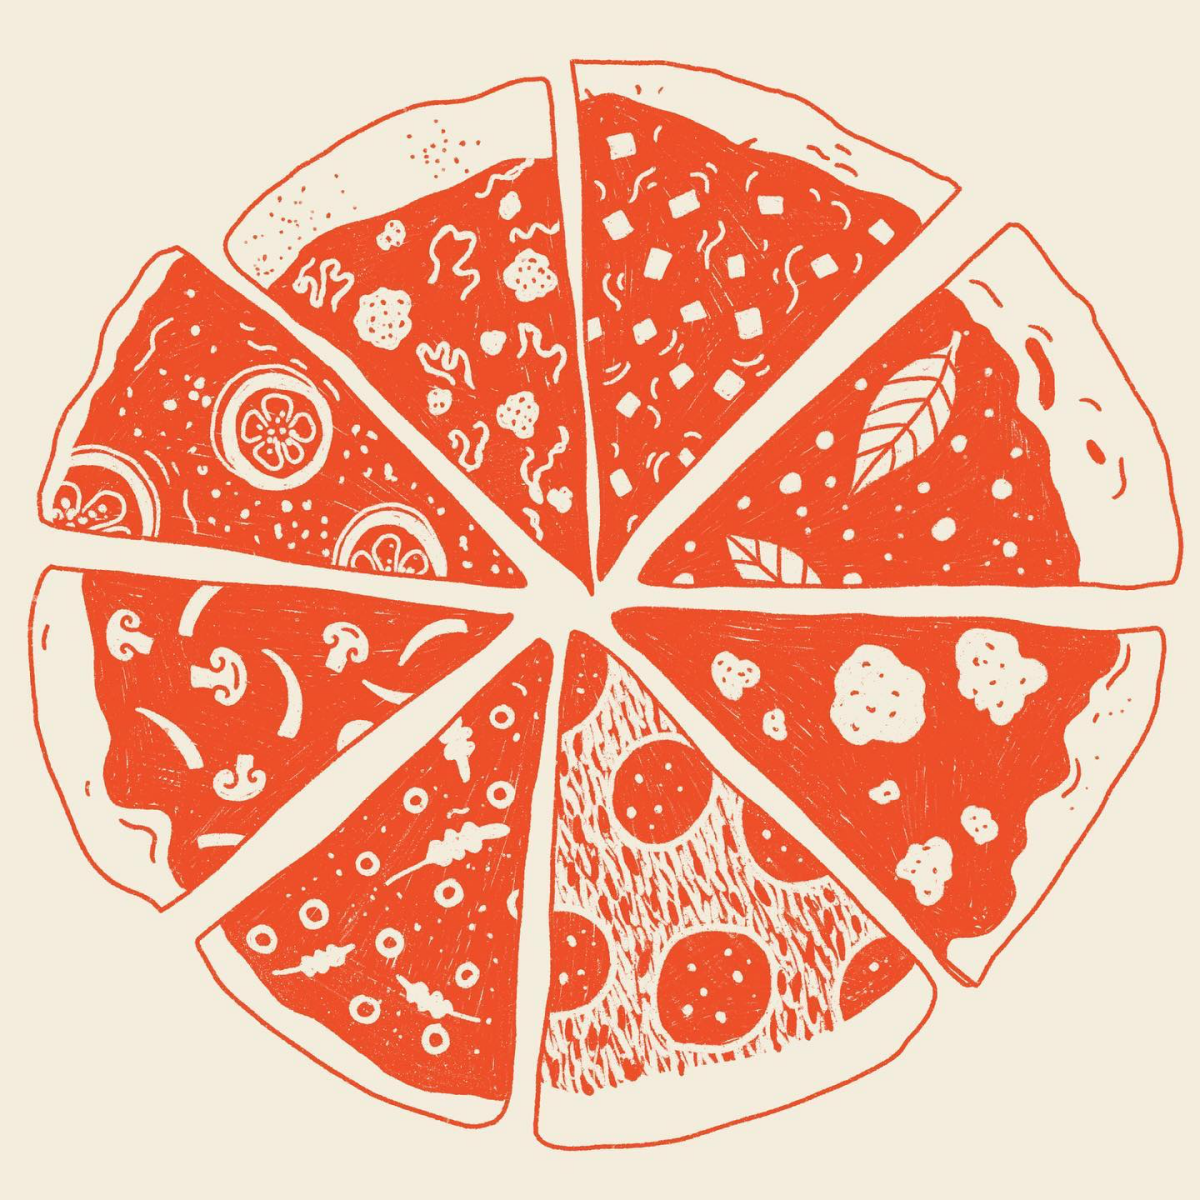 different pizza toppings